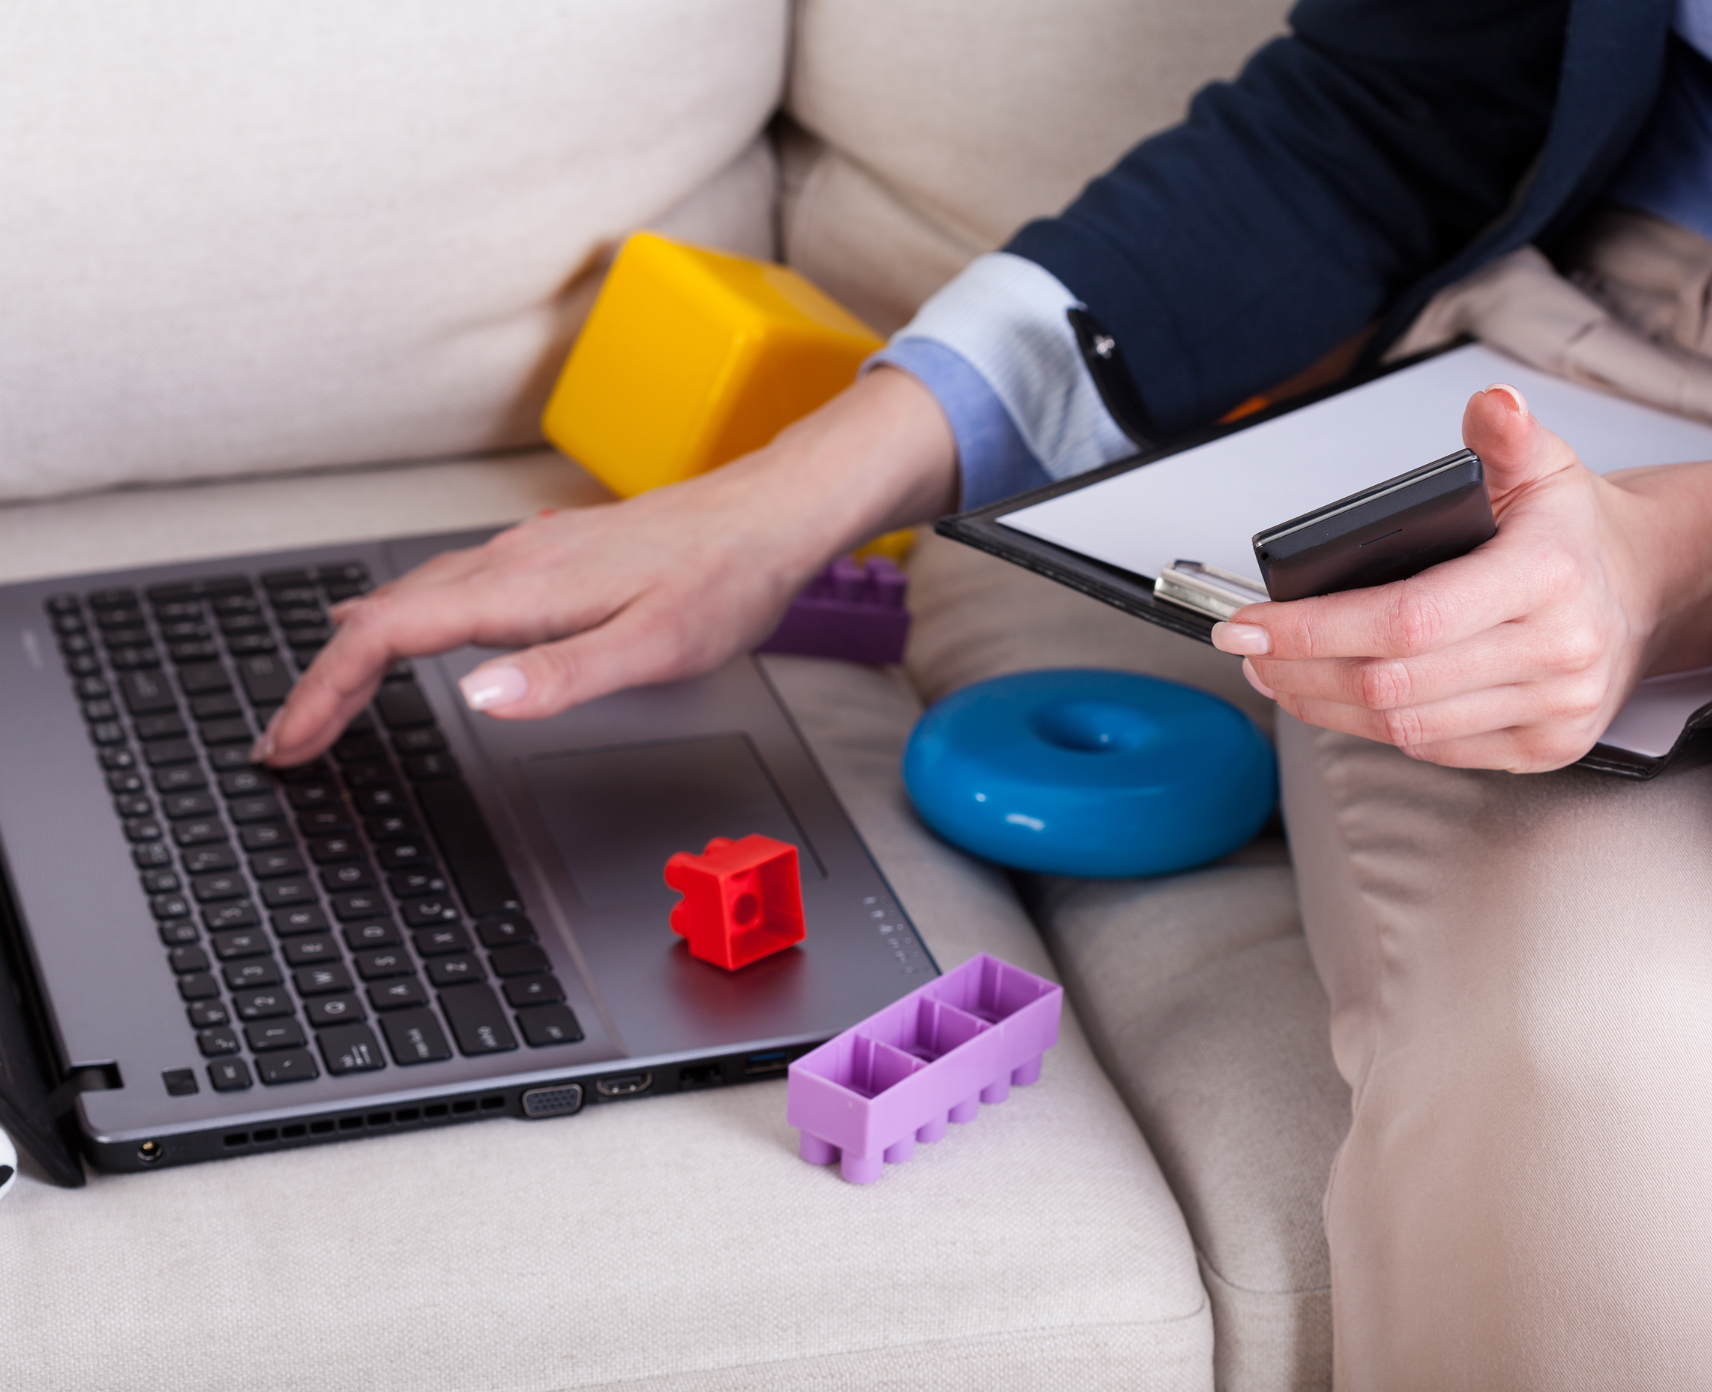 A woman's hands are shown holding a smartphone and touching a laptop. She is seated on a couch next to children's toys.